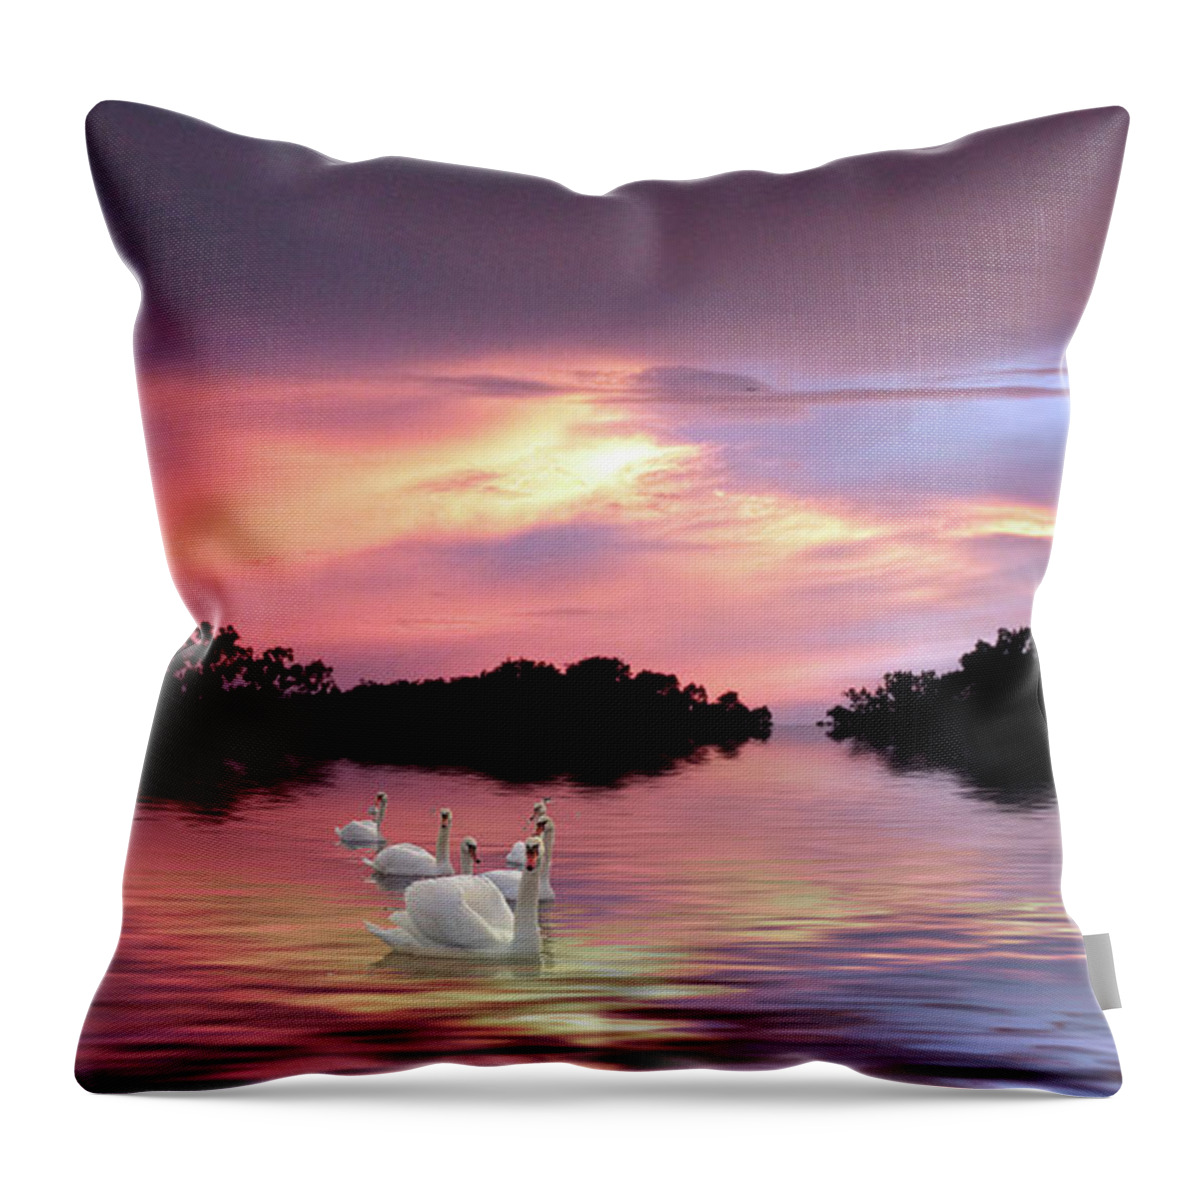 Swans Throw Pillow featuring the photograph Sunset Swans by Jessica Jenney